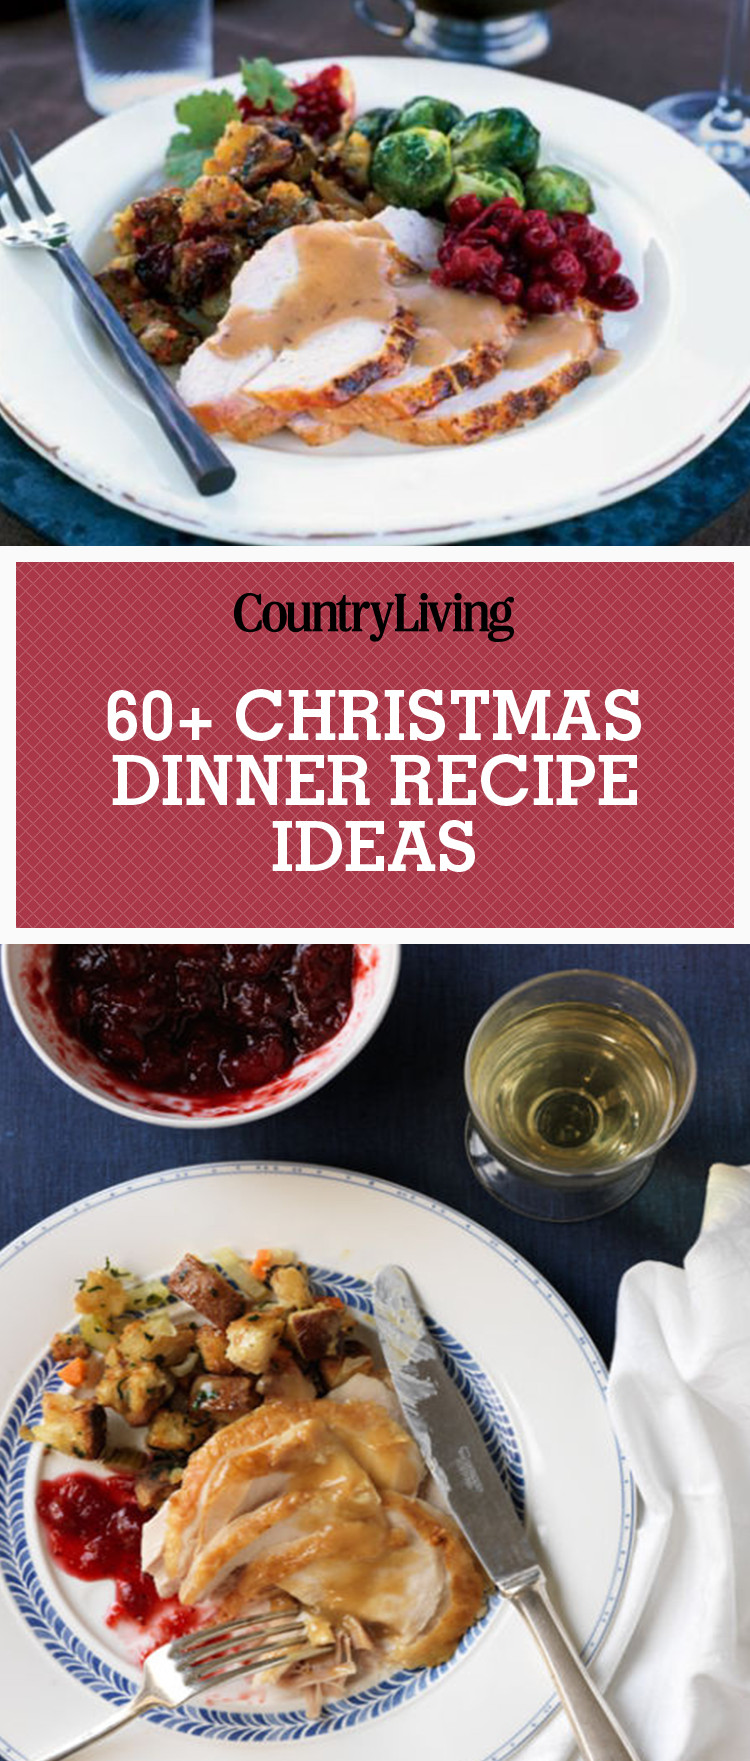 Easy Christmas Dinners Recipes
 70 Easy Christmas Dinner Ideas Best Holiday Meal Recipes